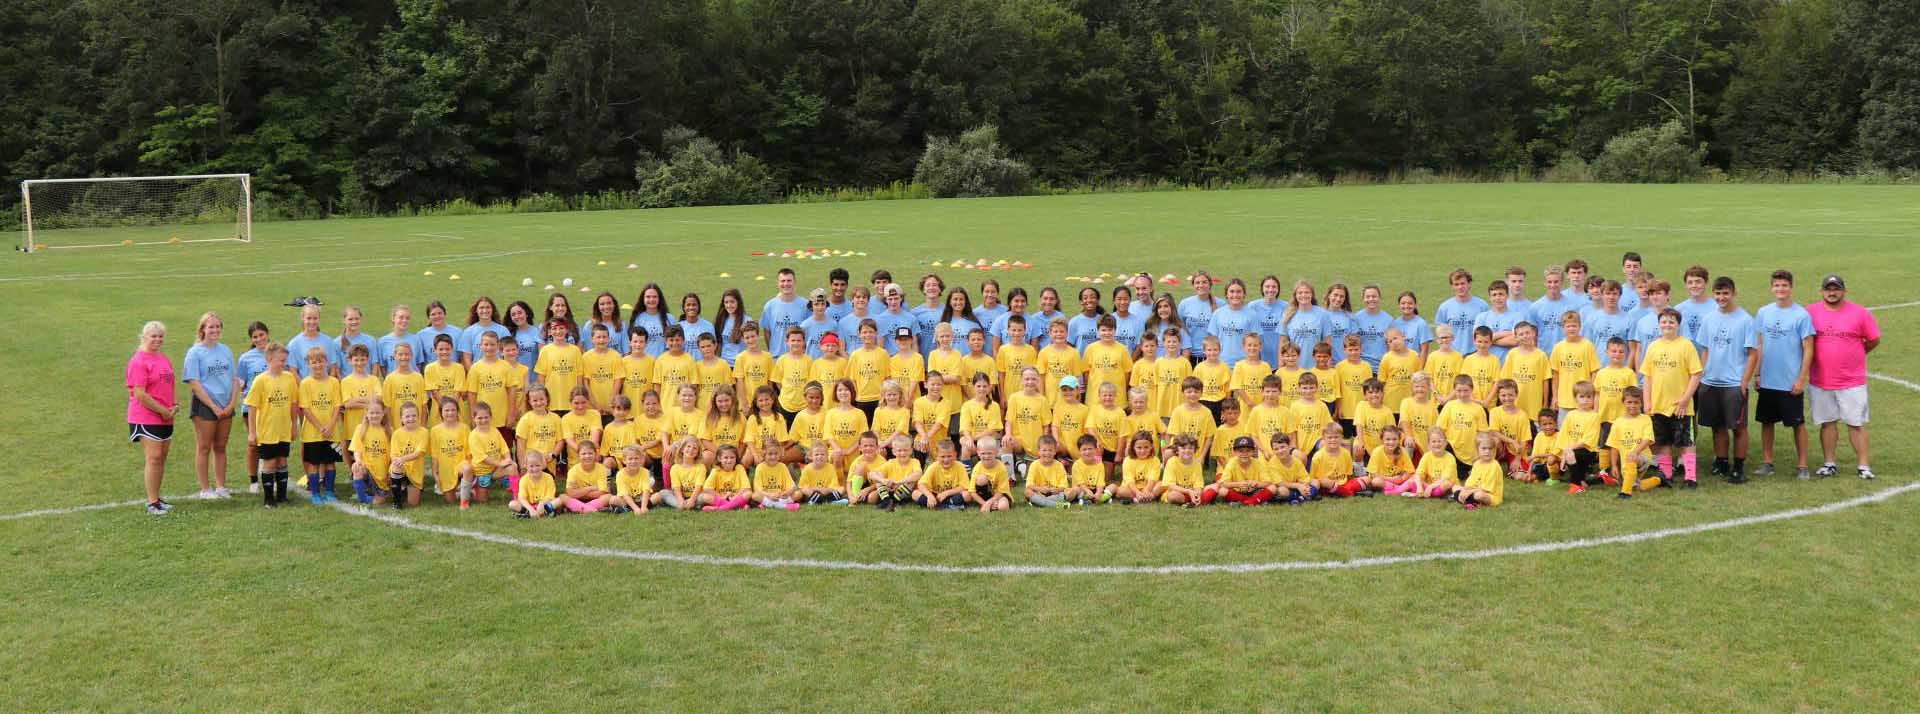 Register Today for Eagle Soccer School and Ray Reid Travel Camp